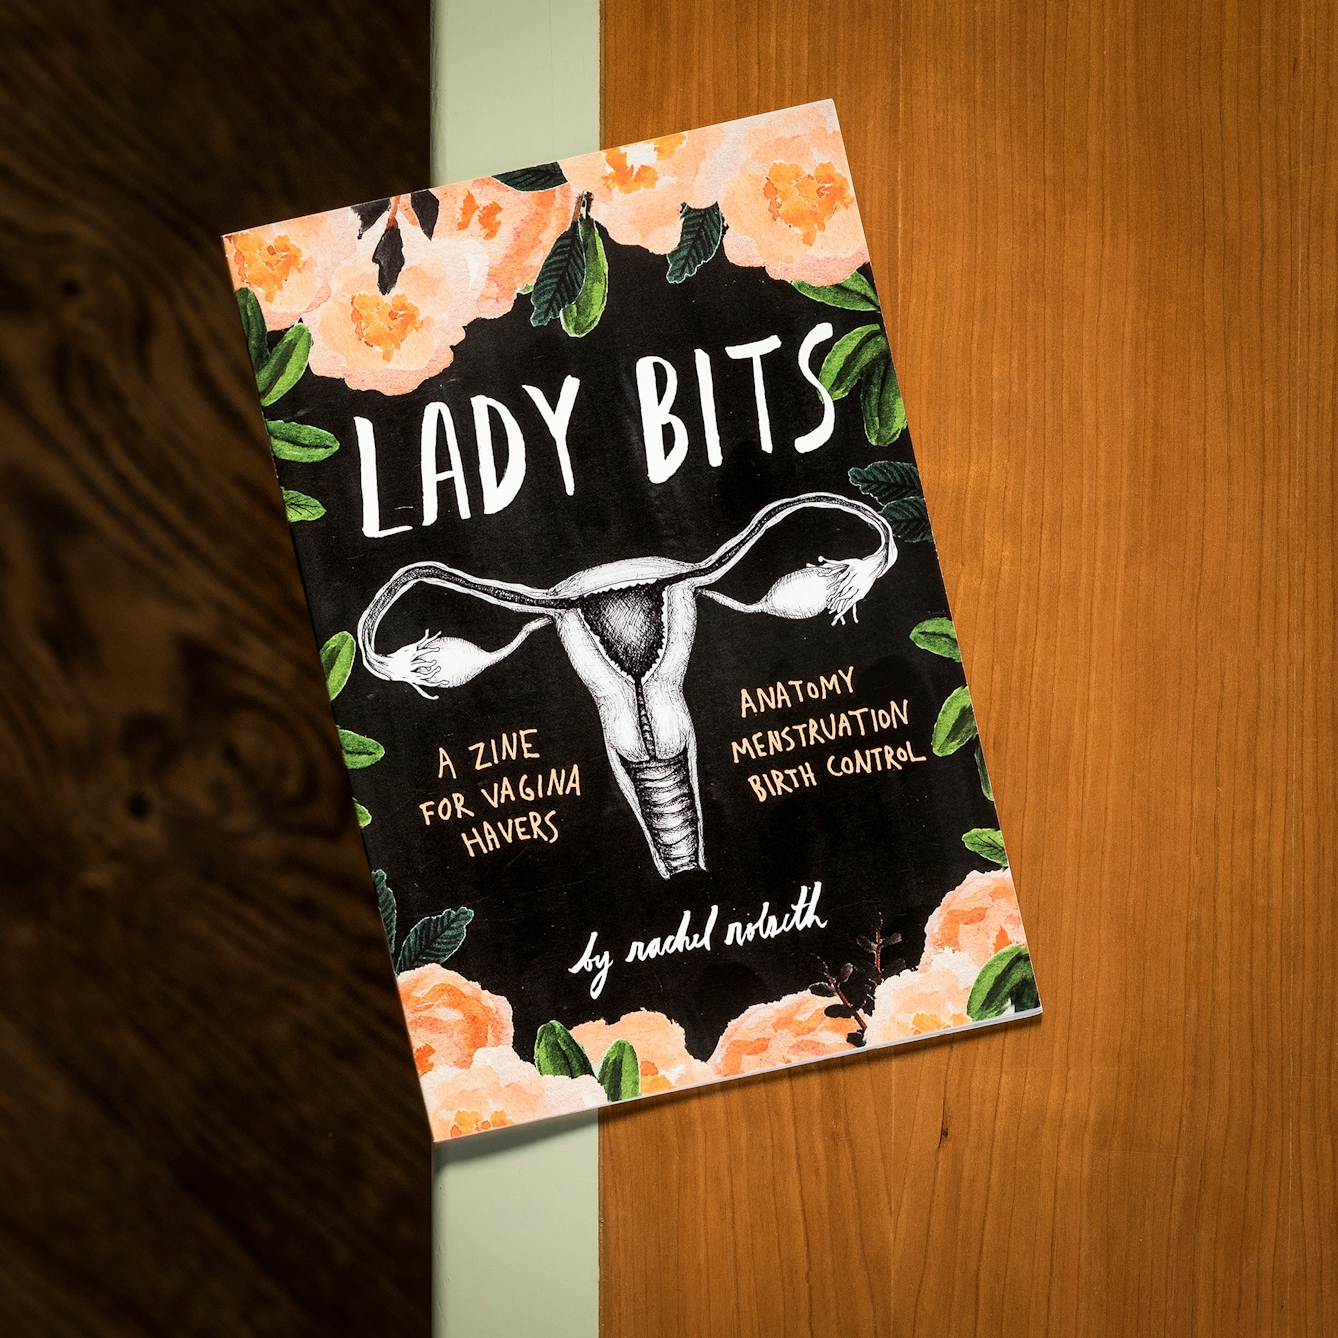 Photograph of Lady Bits zine on a library desk